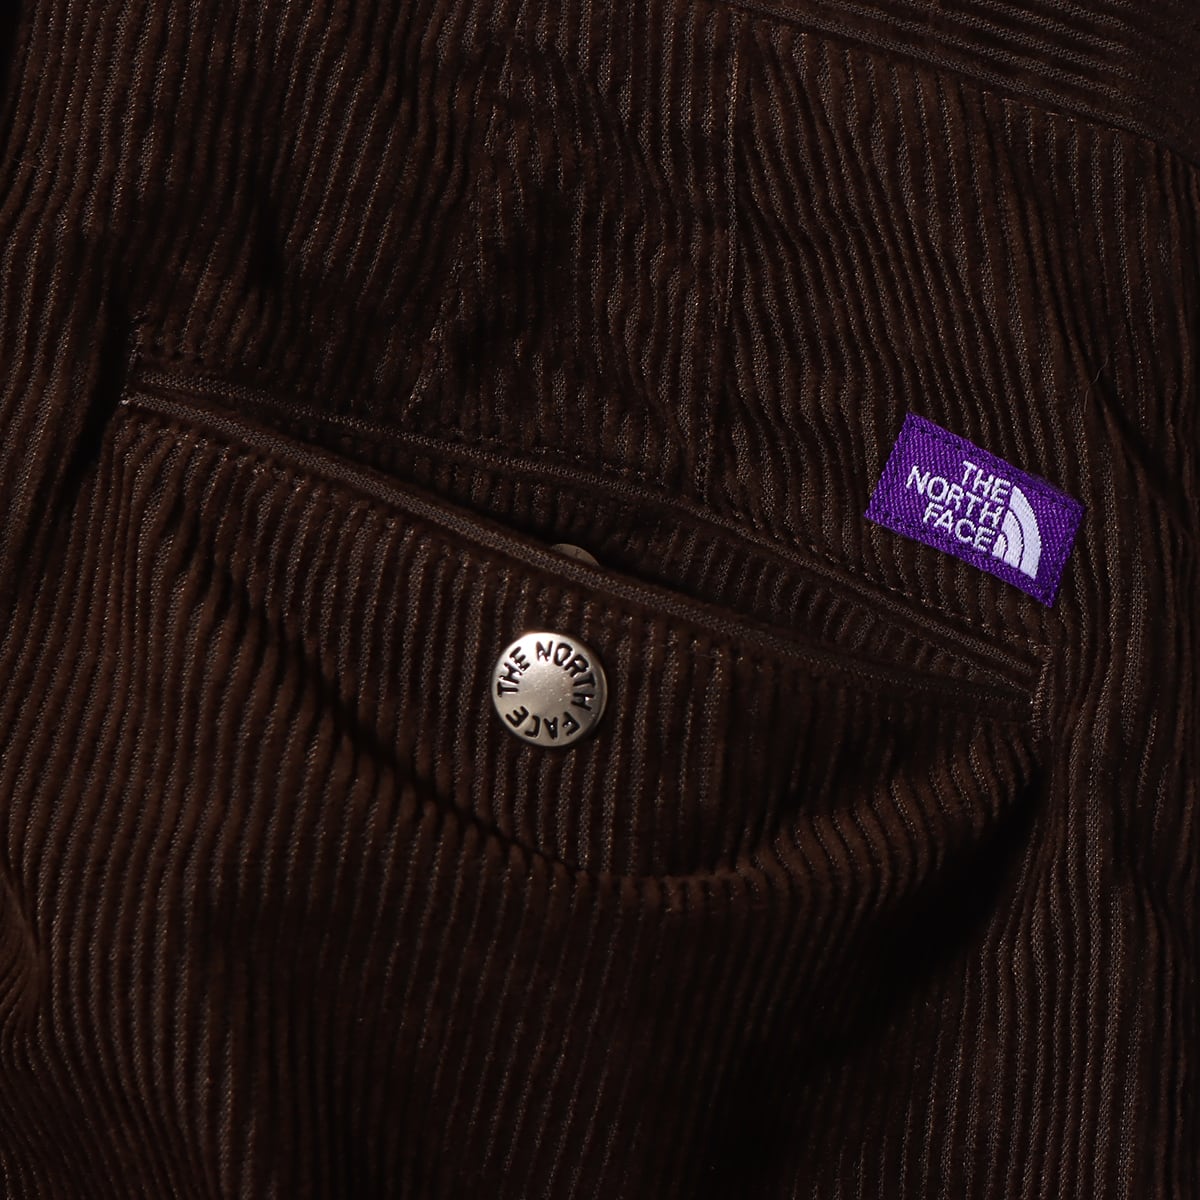 THE NORTH FACE PURPLE LABEL Corduroy Wide Tapered Pants Brown 22FW-I